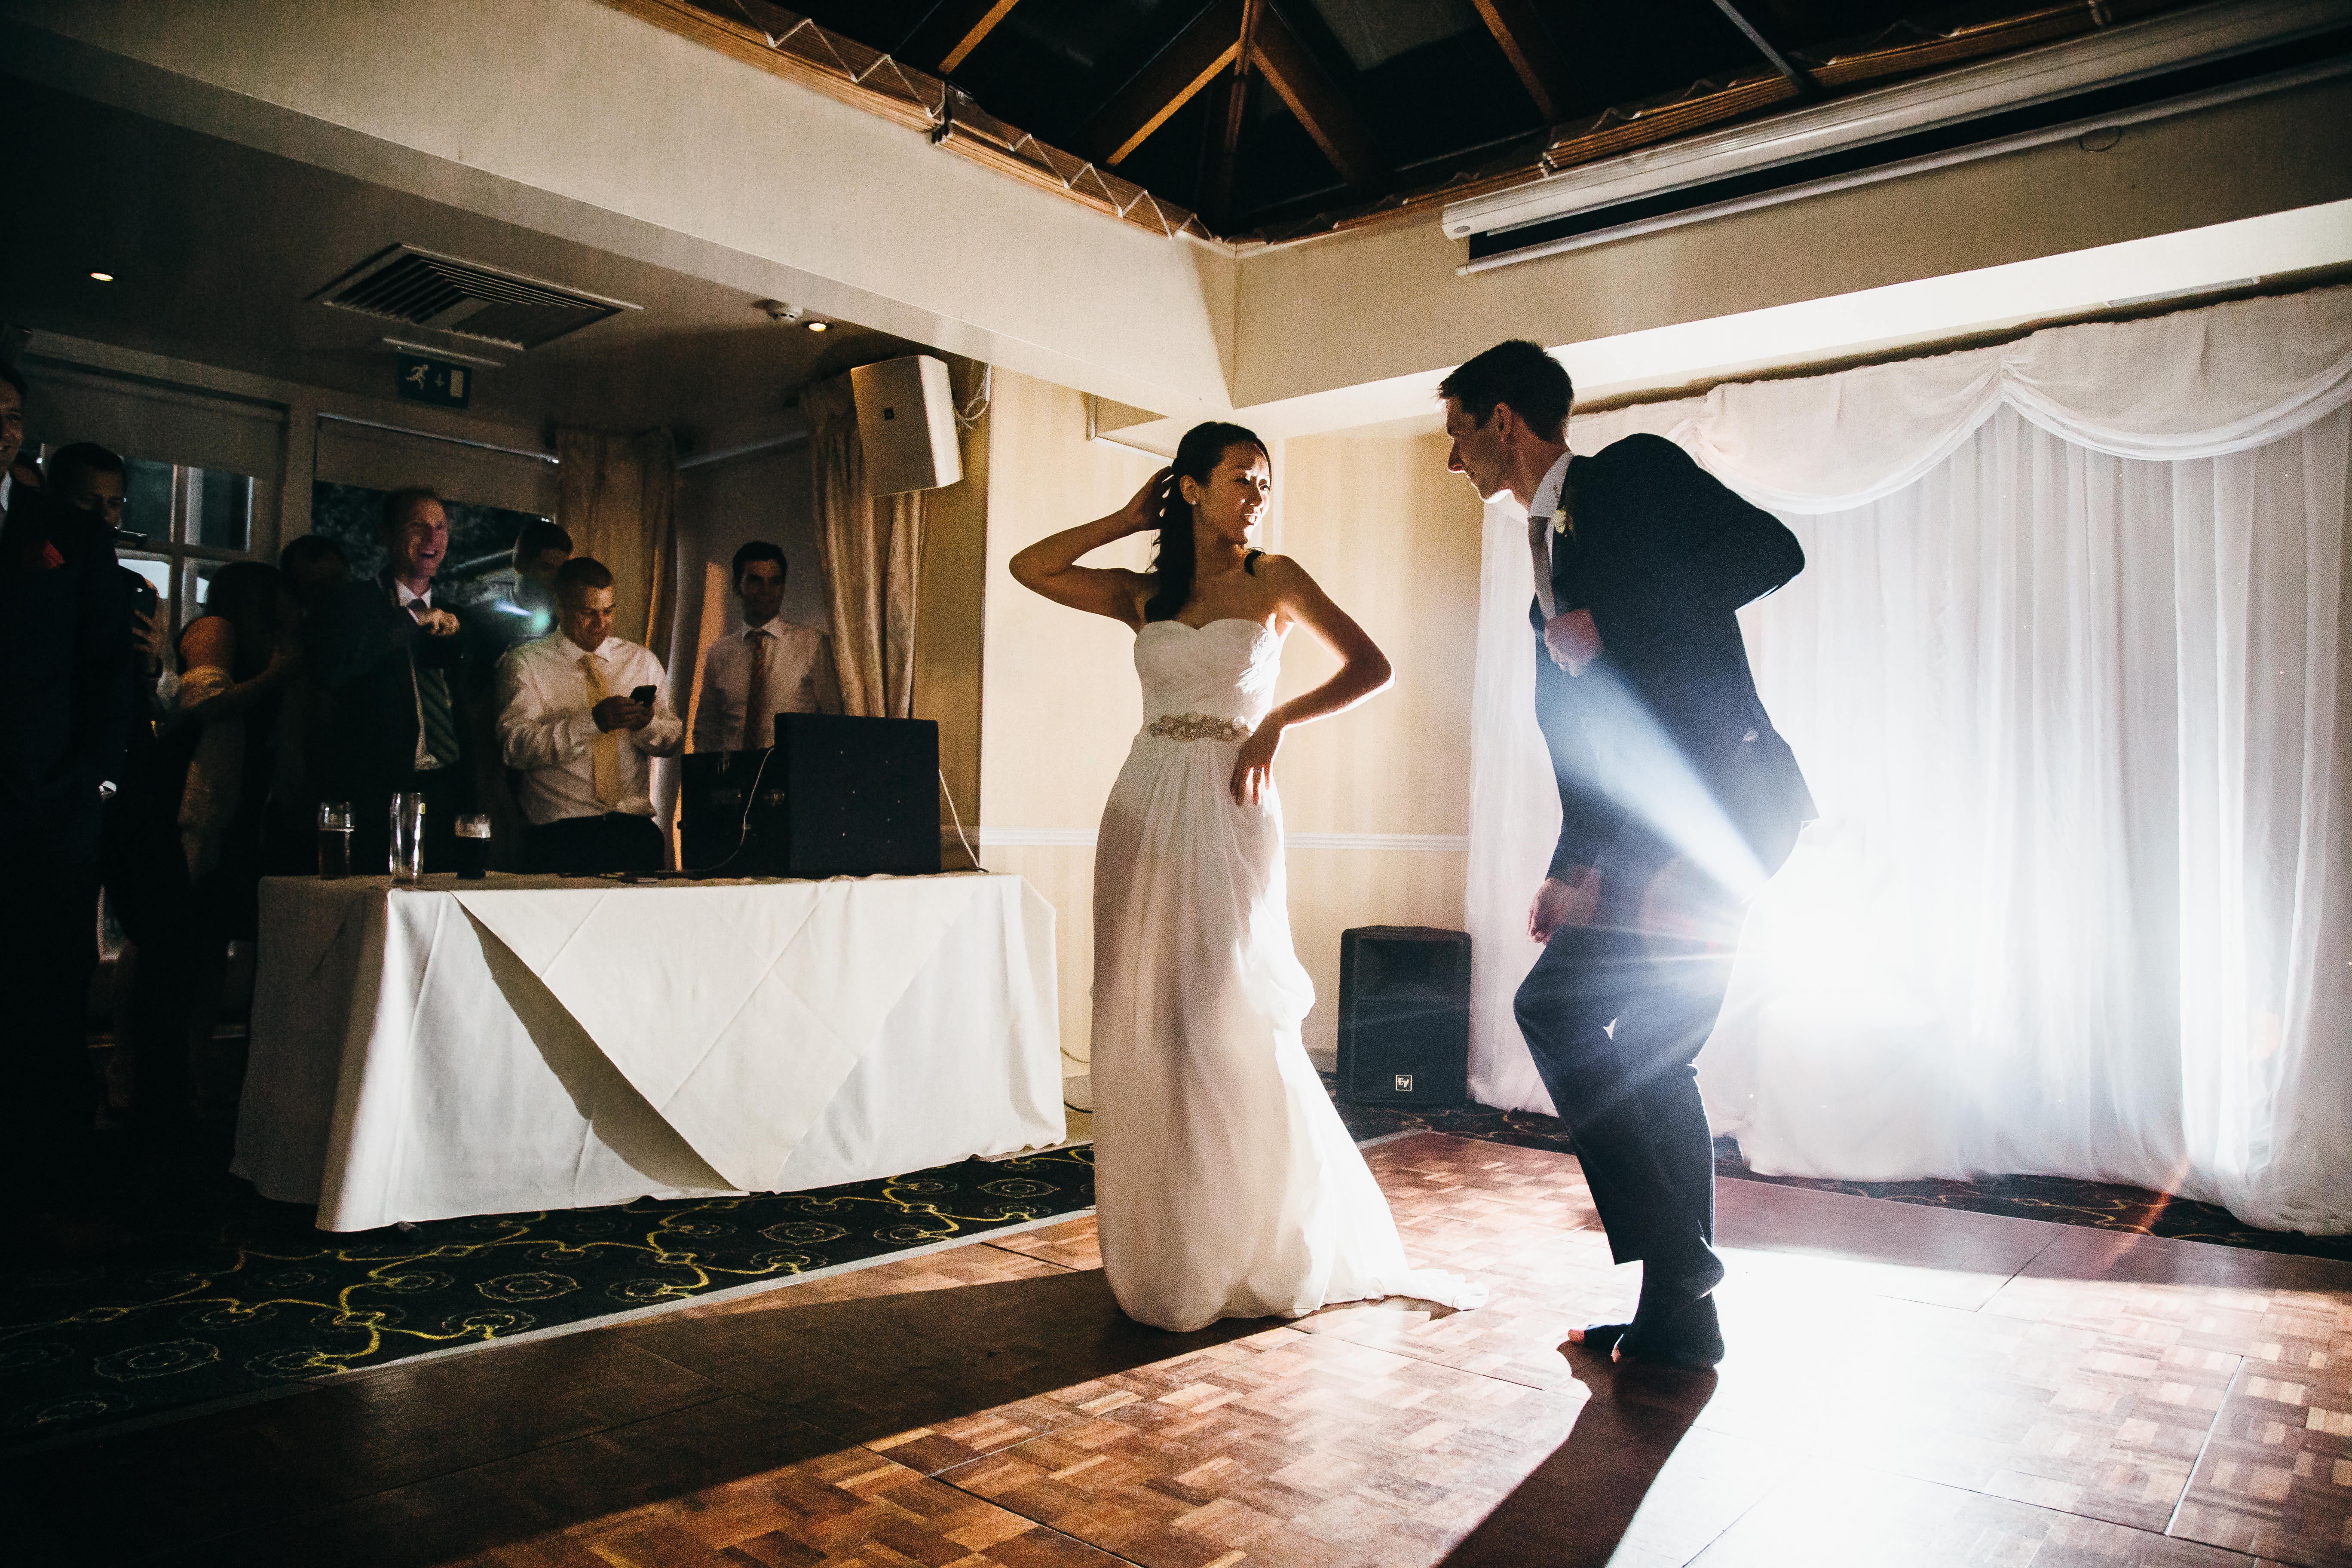 documentary wedding photography london and brighton speeches pulp fiction dance